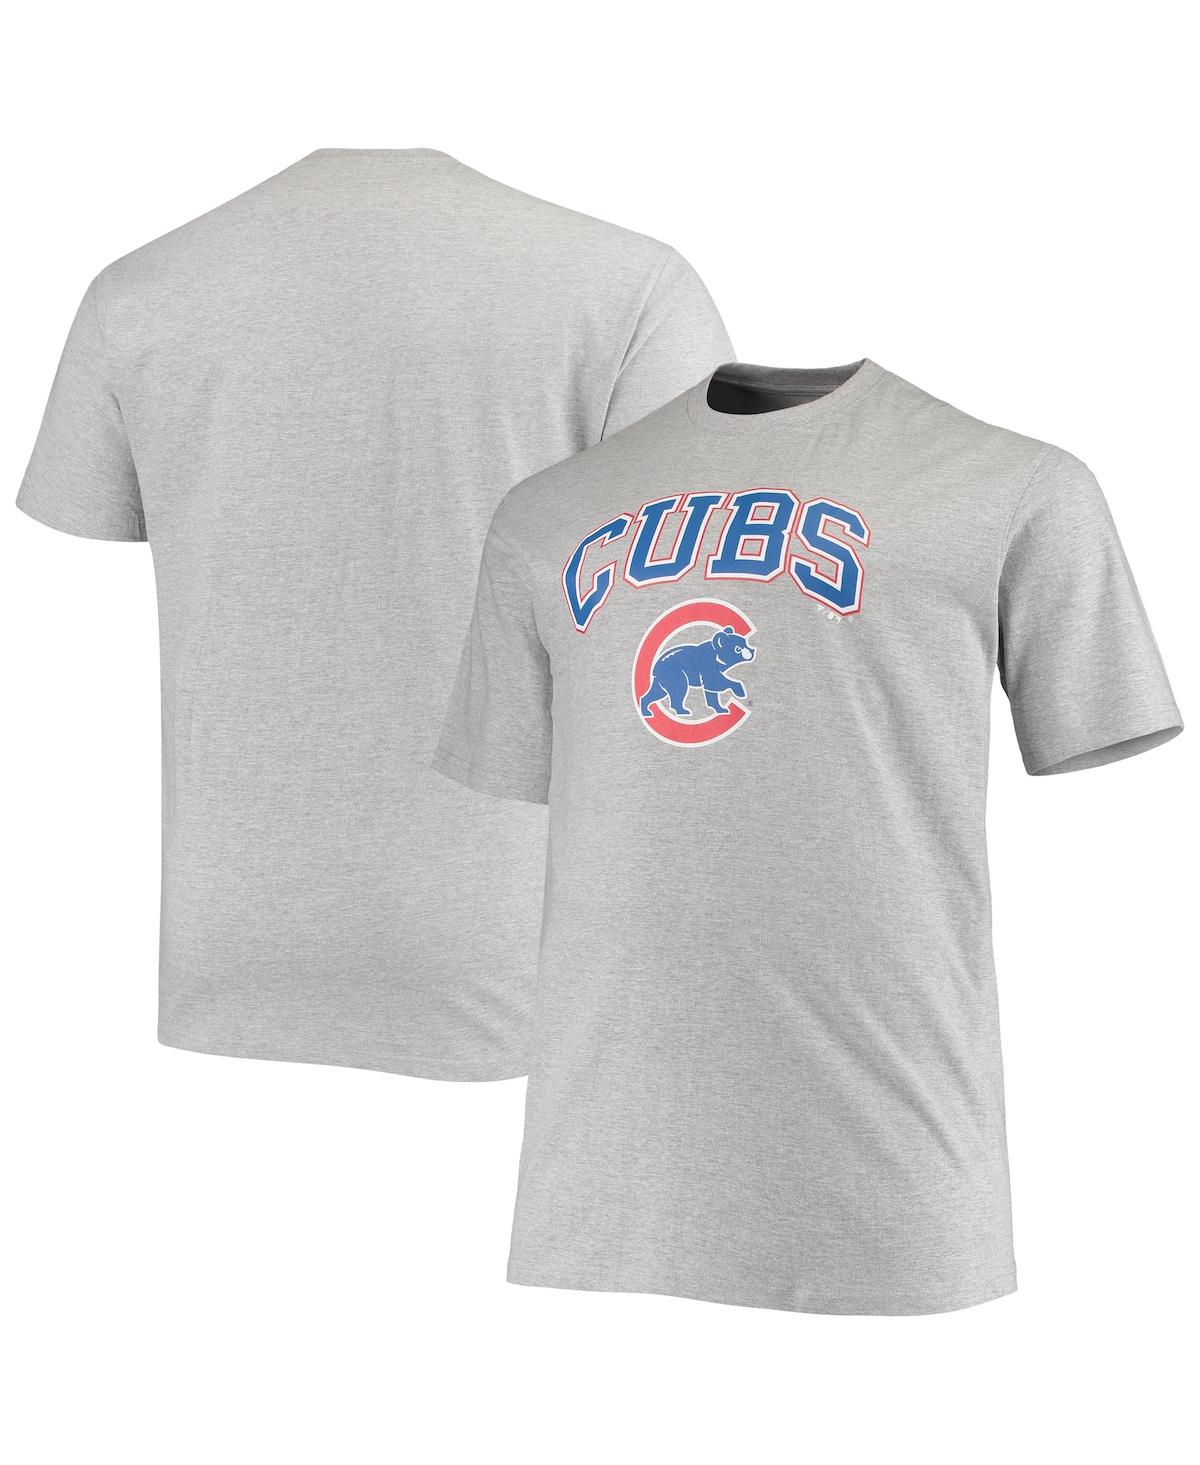 Fanatics Men's  Heathered Gray Chicago Cubs Big And Tall Secondary T-shirt